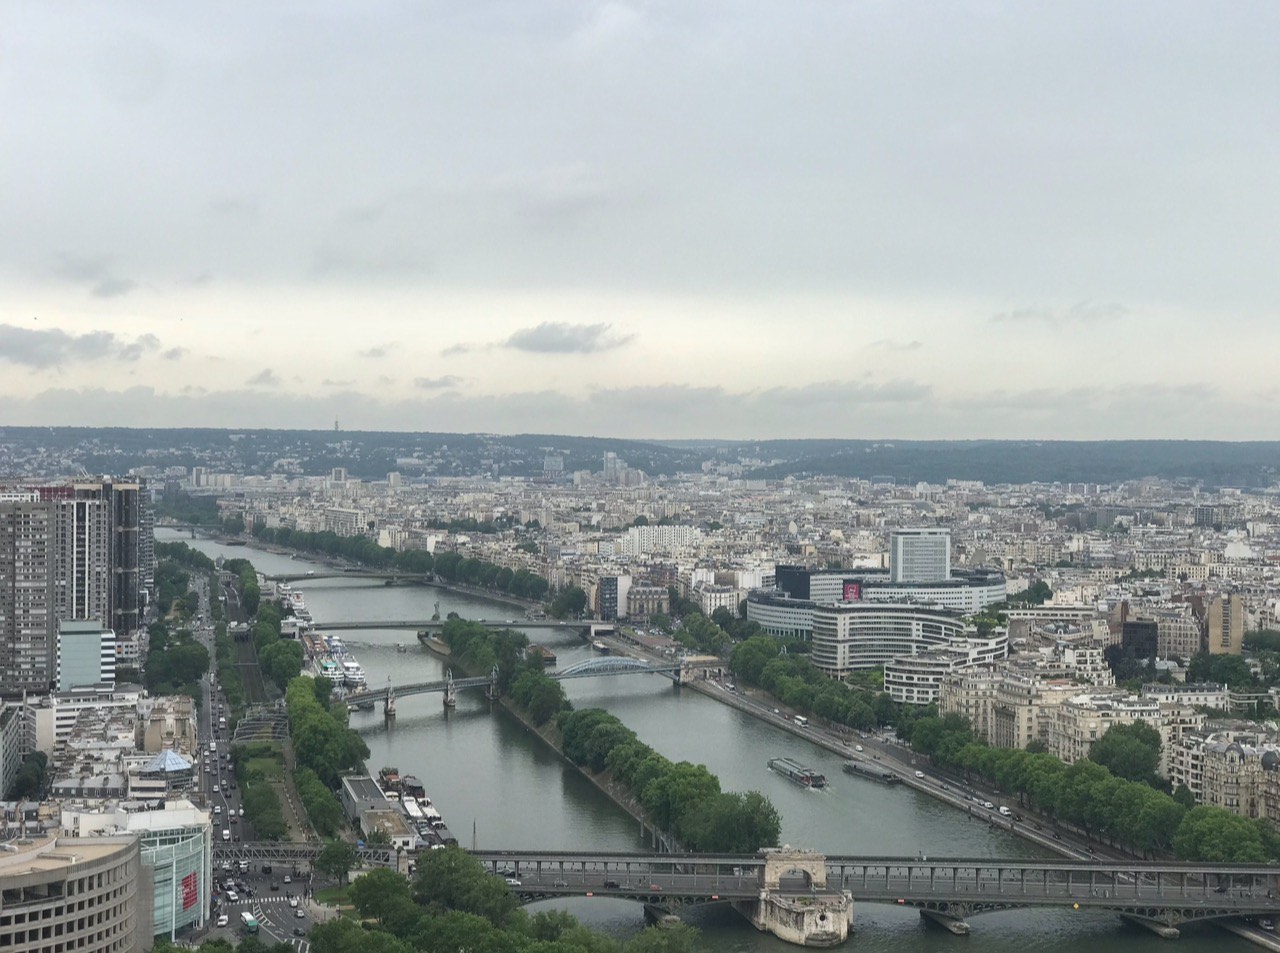 alt txt = "Views from the Eiffel Tower overlooking river and skyline."